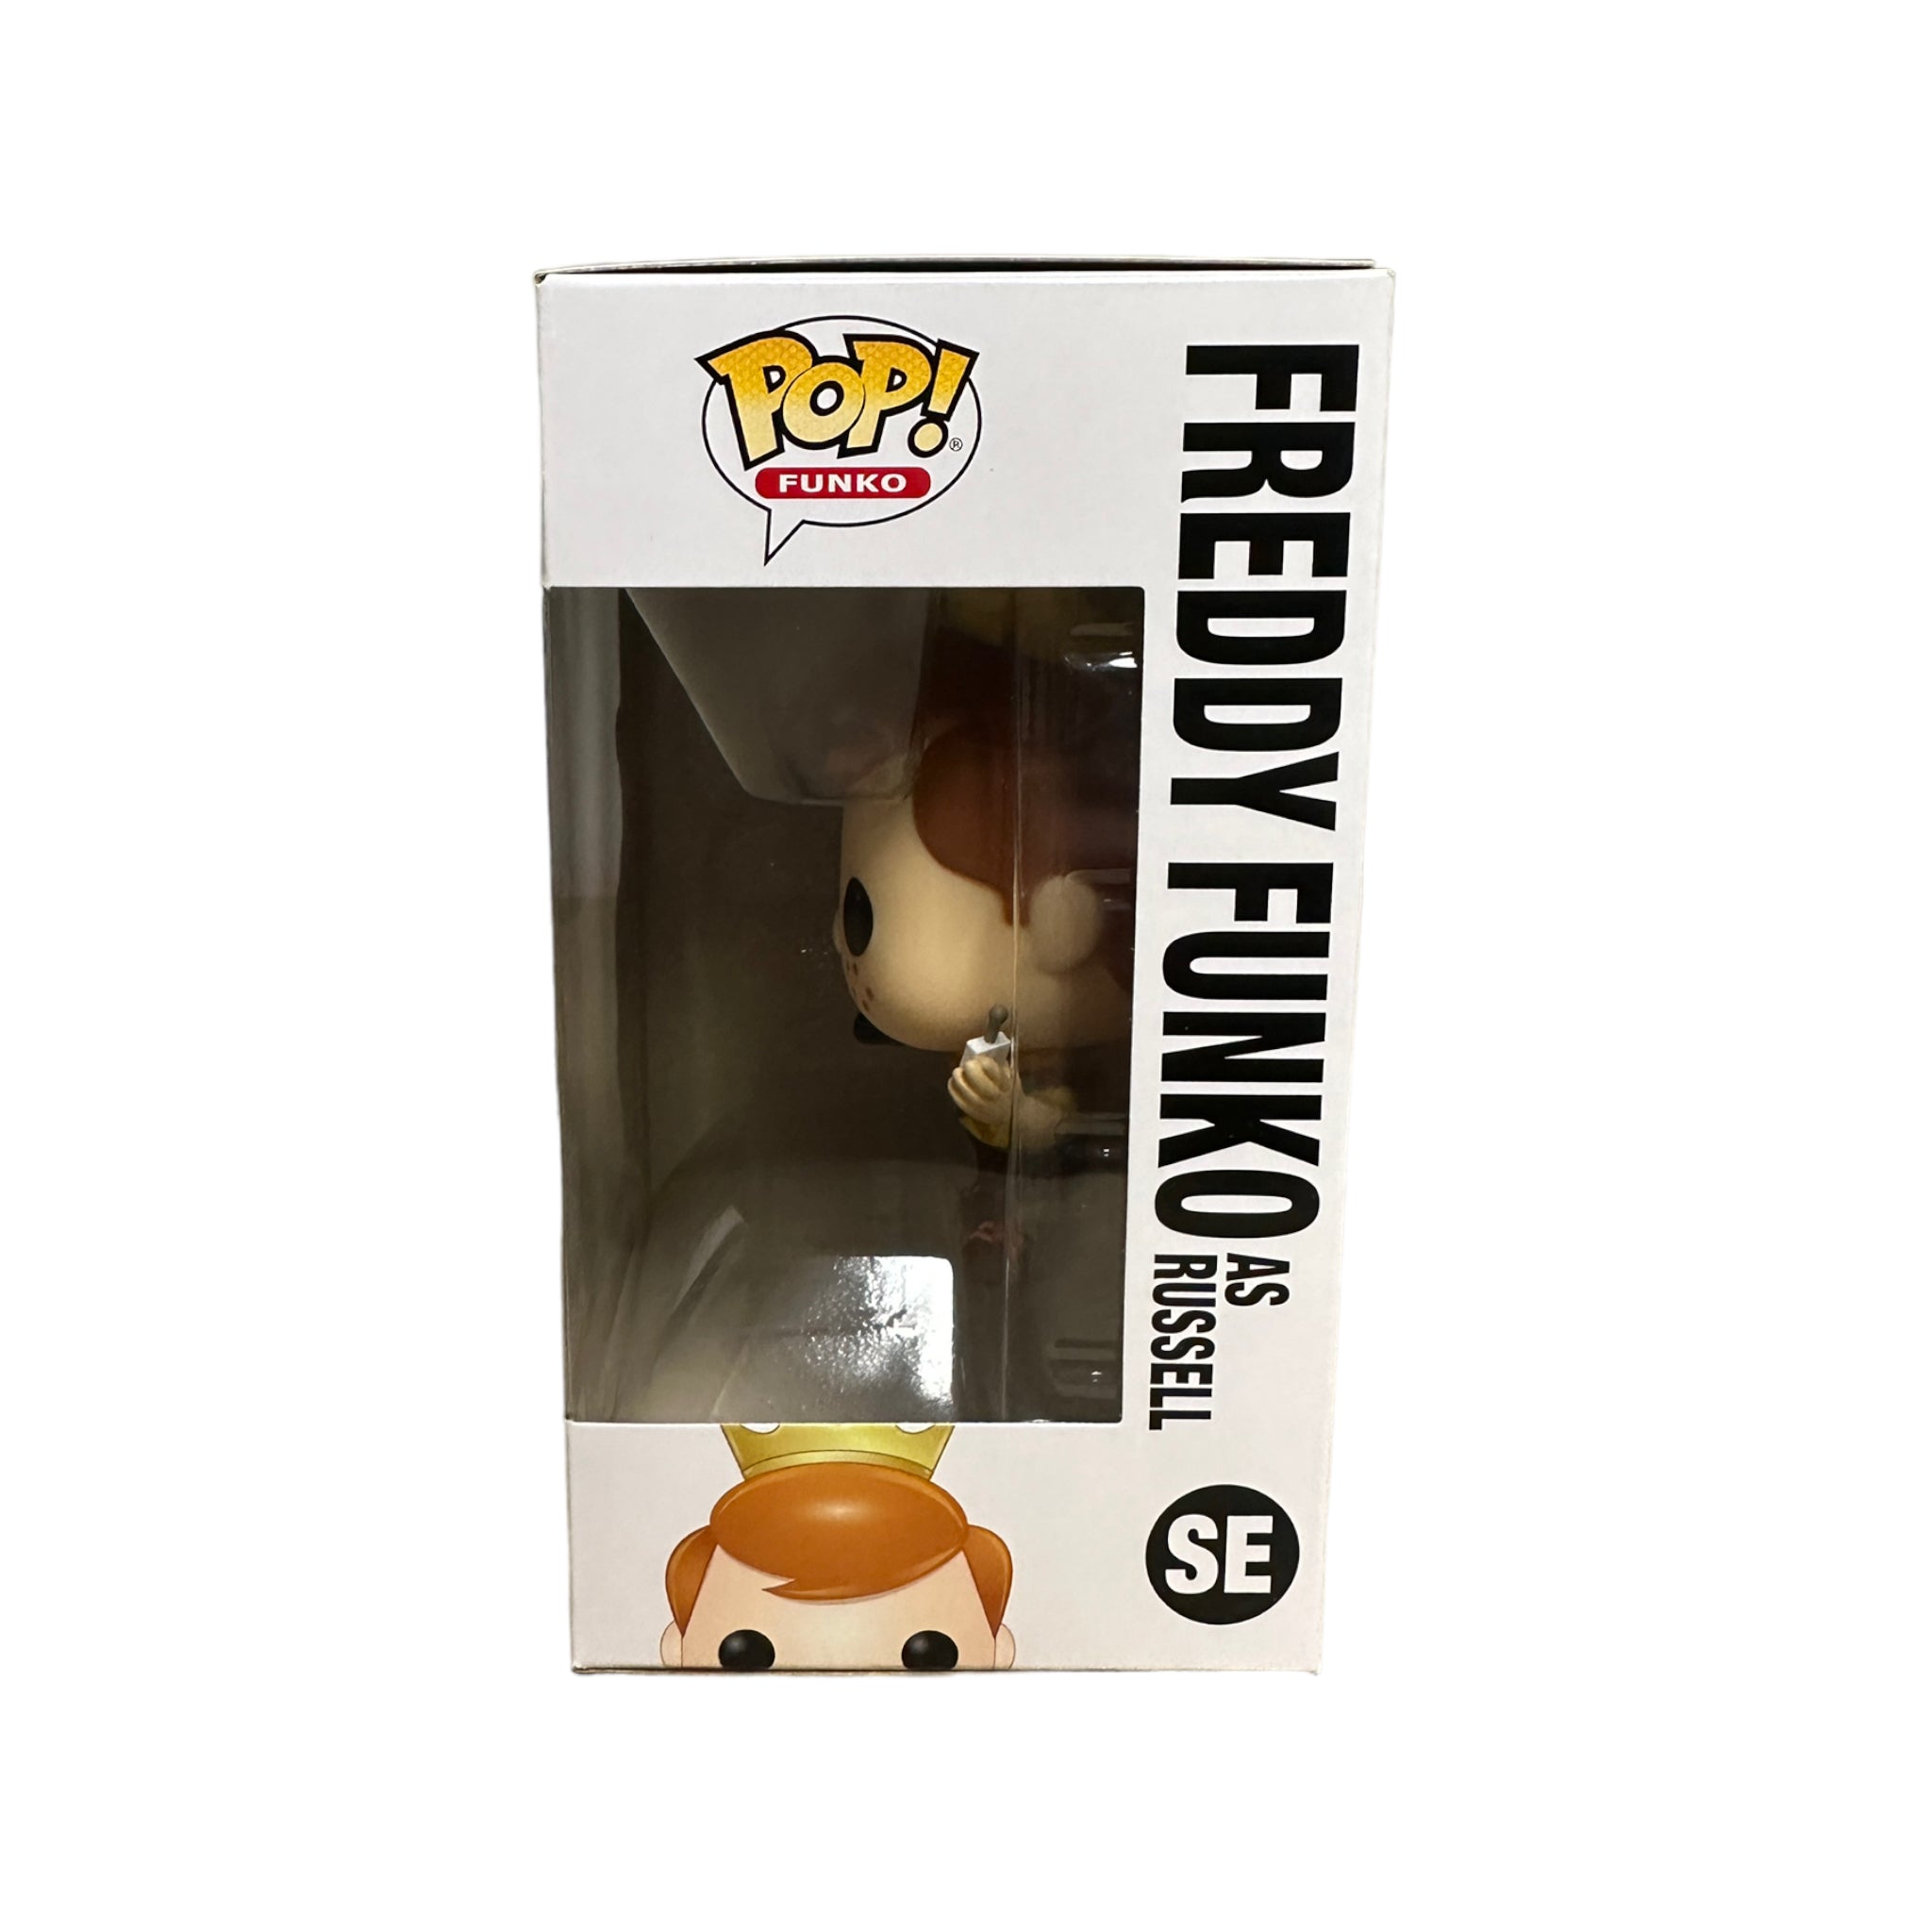 Freddy Funko as Russell Funko Pop! - Dug Days - SDCC 2022 Box of Fun Exclusive LE4000 Pcs - Condition 9.5/10